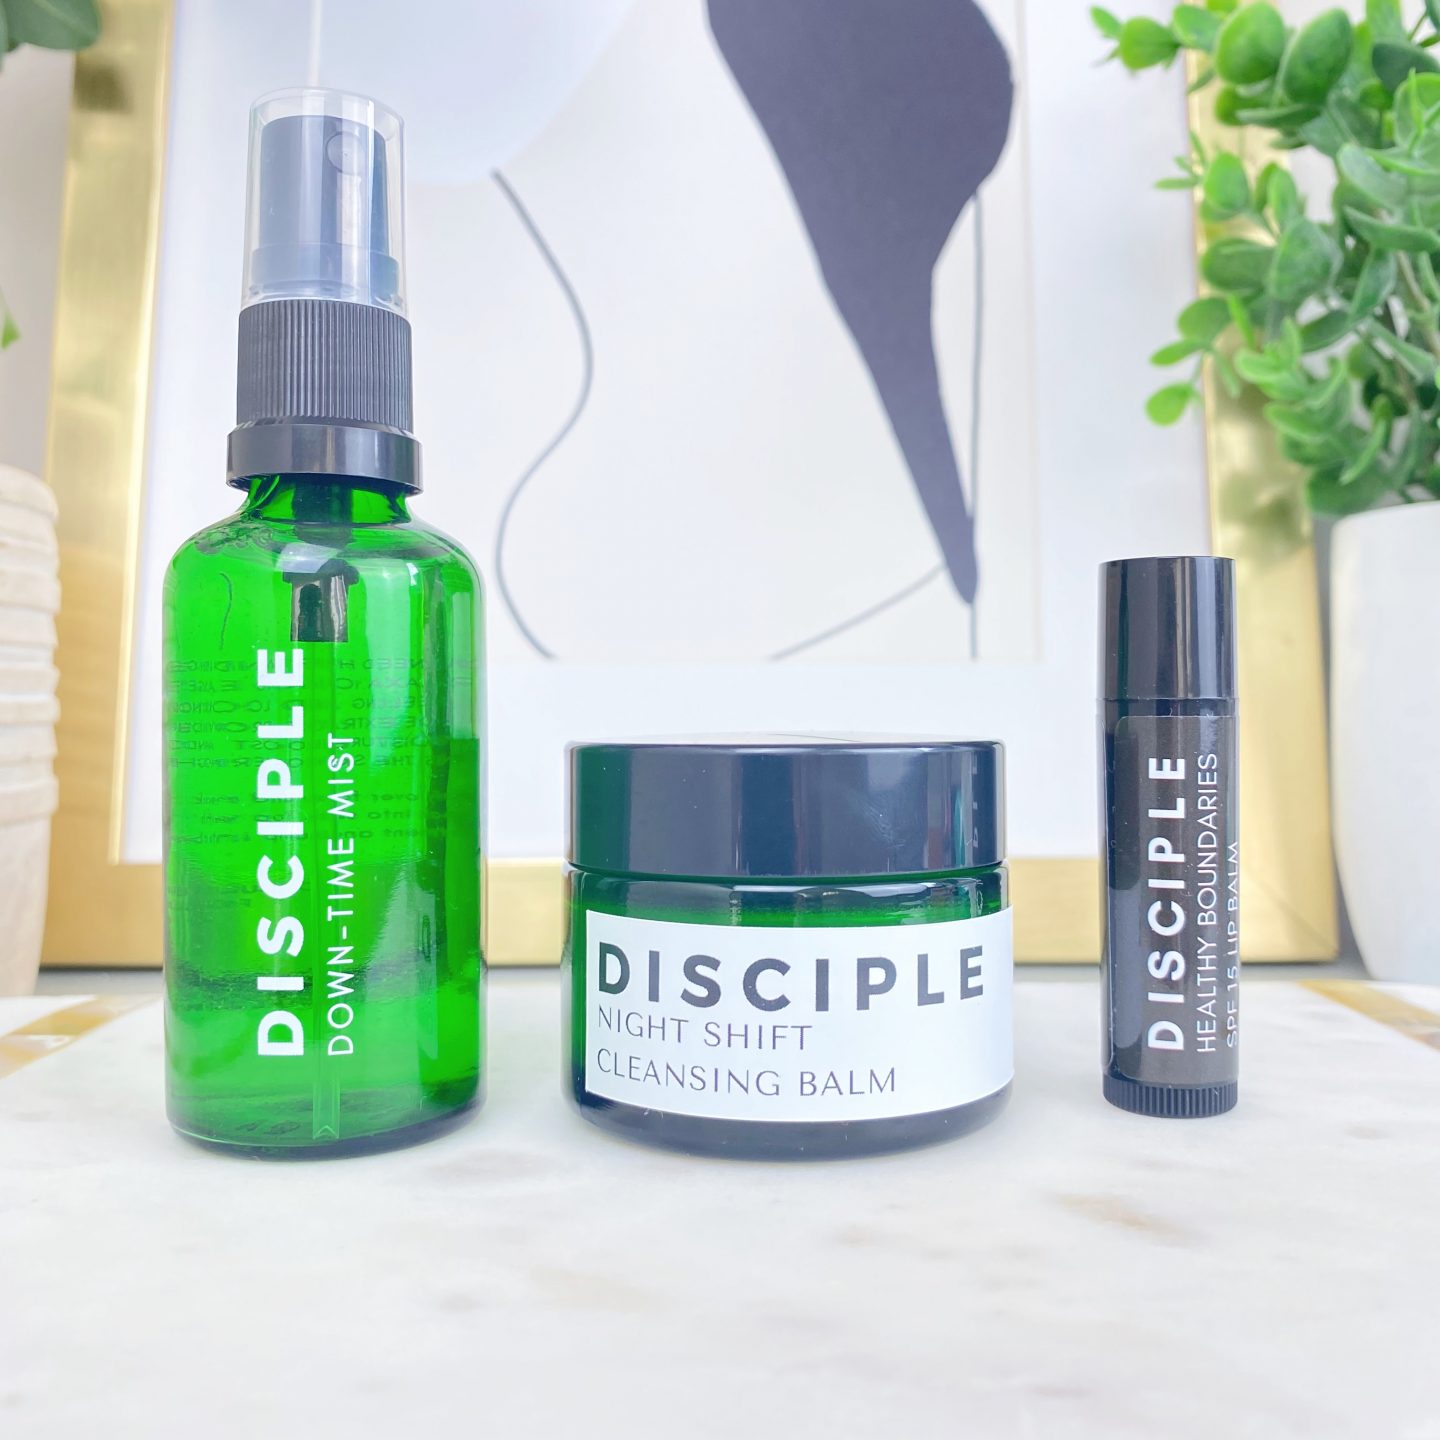 Three new products I love from Disciple